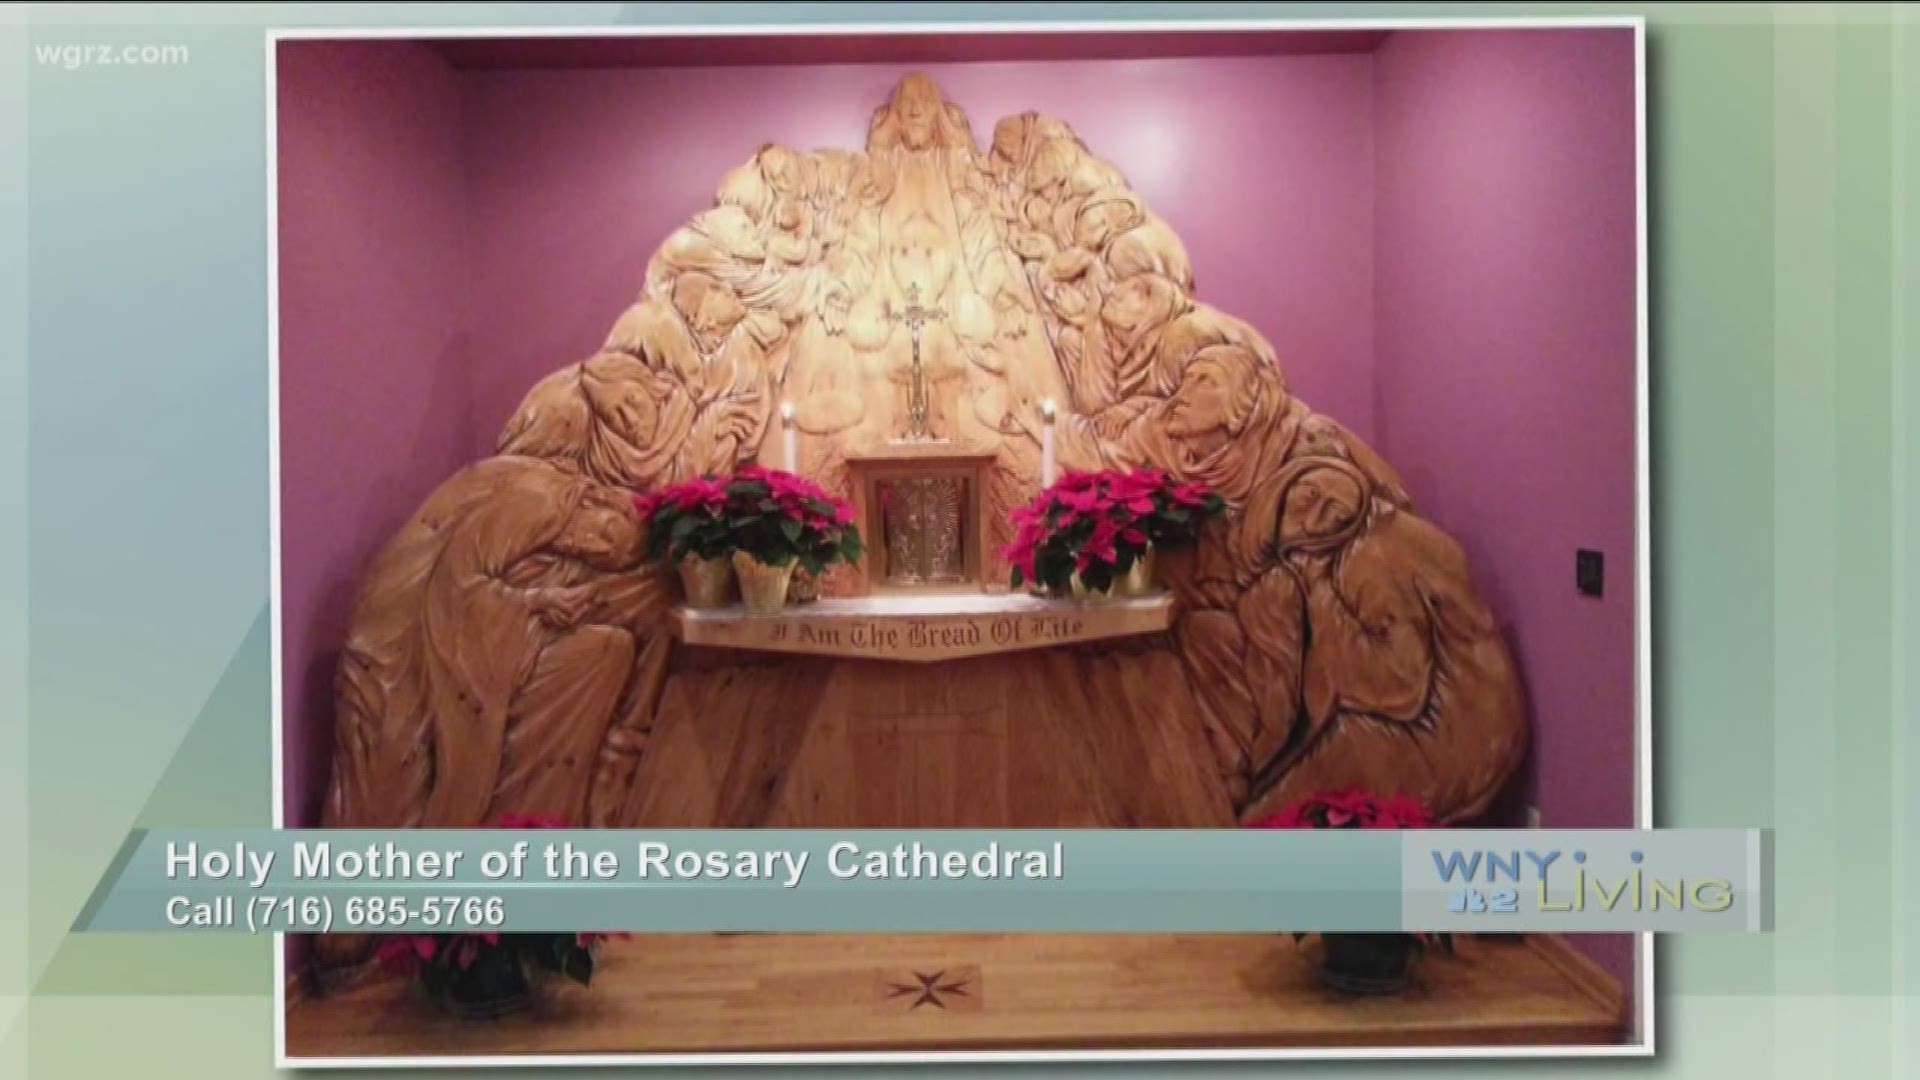 WNY Living - April 13 - Holy Mother of the Rosary Cathedral (SPONSORED CONTENT)